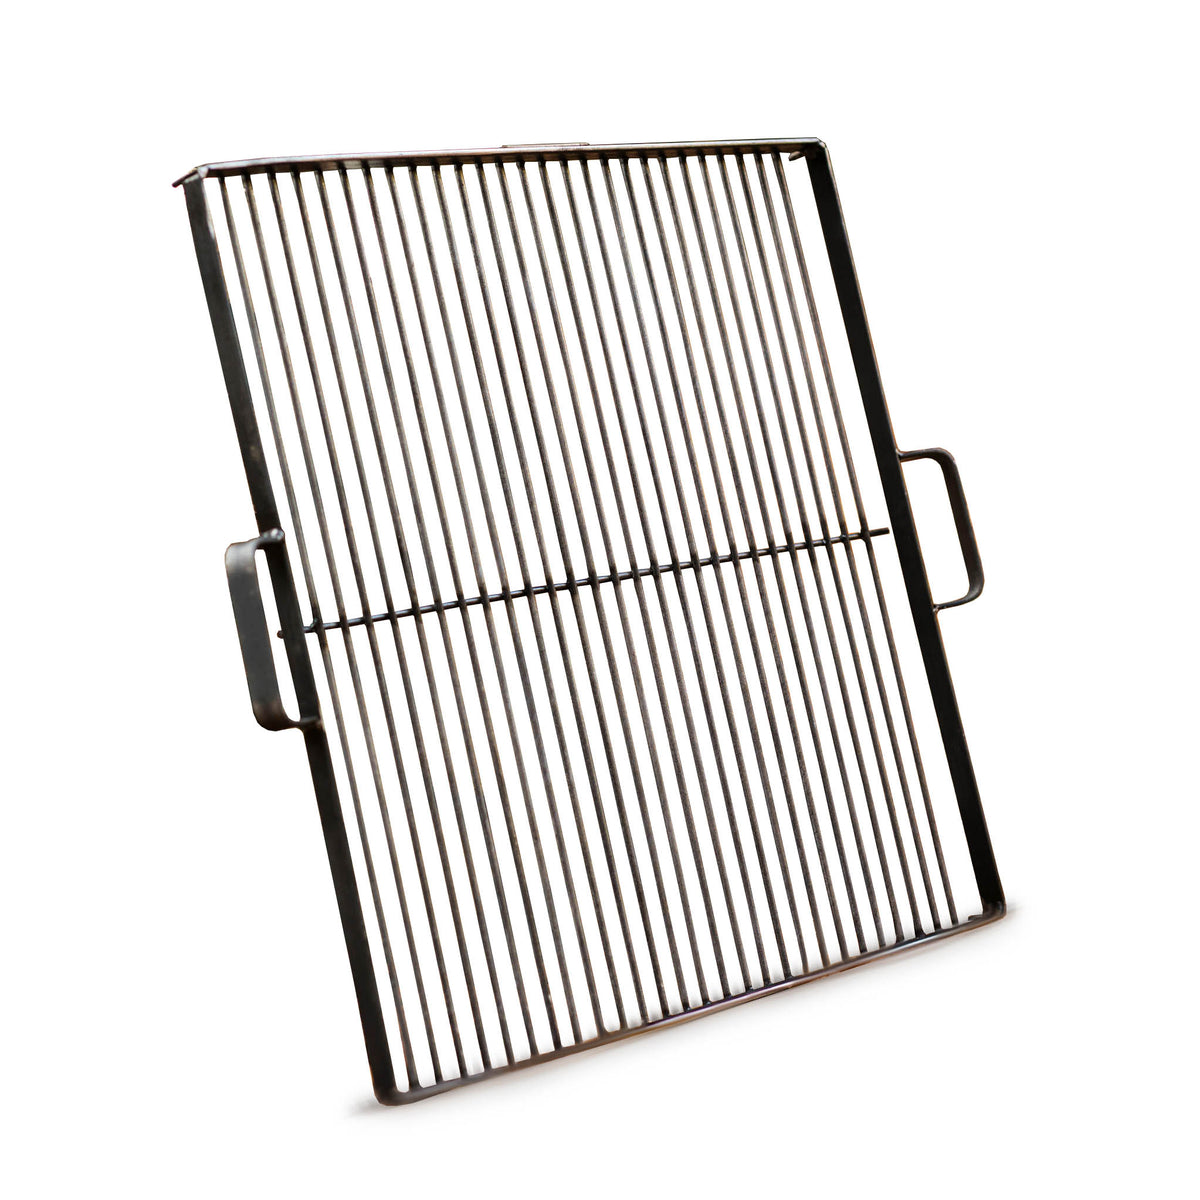 Square Steel Grate for Fire Pit by Roseland Furniture